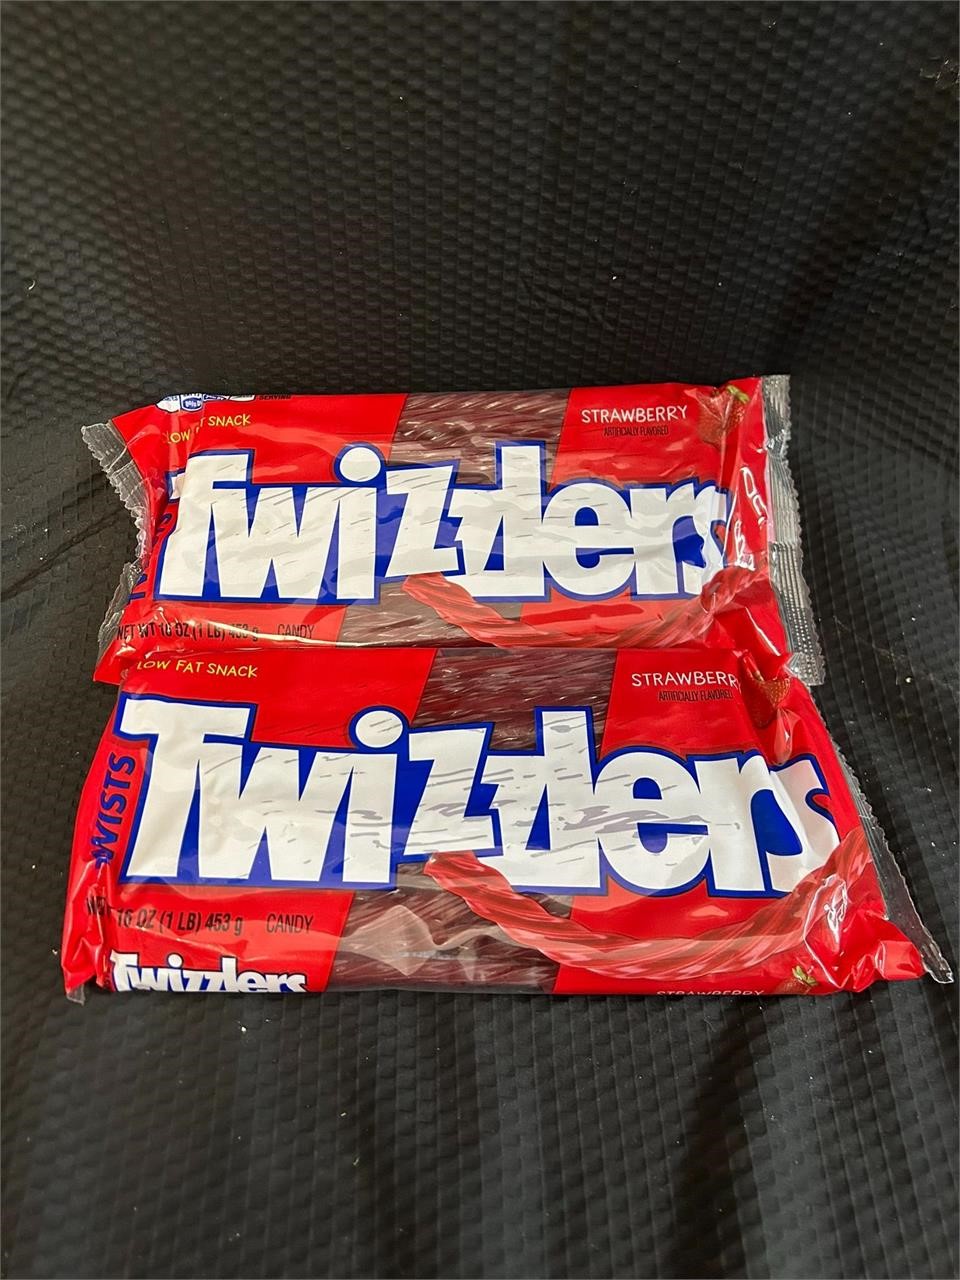 Two Bags of Twizzlers